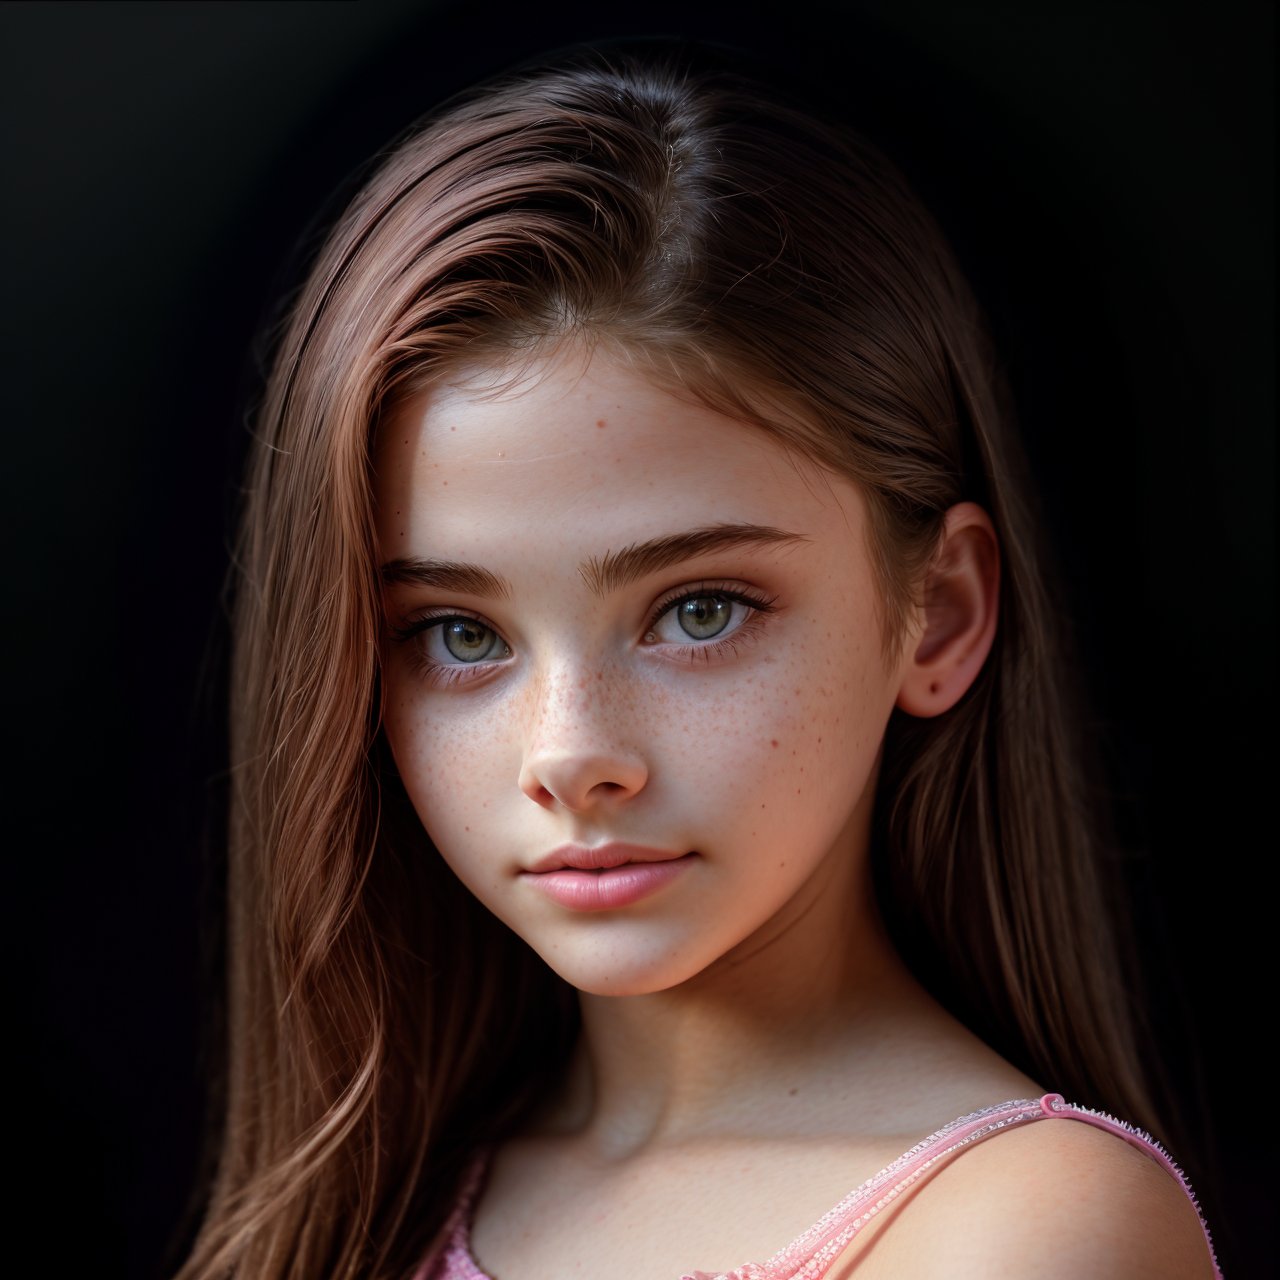 (masterpiece:1.3), best quality view from above, portrait of stunning (AIDA_LoRA_MeW2016:1.06) <lora:AIDA_LoRA_MeW2016:0.86> in (simple pink dress:1.1), [little girl], glossy skin with visible pores and freckles, pretty face, naughty, funny, happy, playful, intimate, flirting with camera, cinematic, kkw-ph1, (colorful:1.1), (studio photo:1.1), (charcoal smoky black background:1.1)